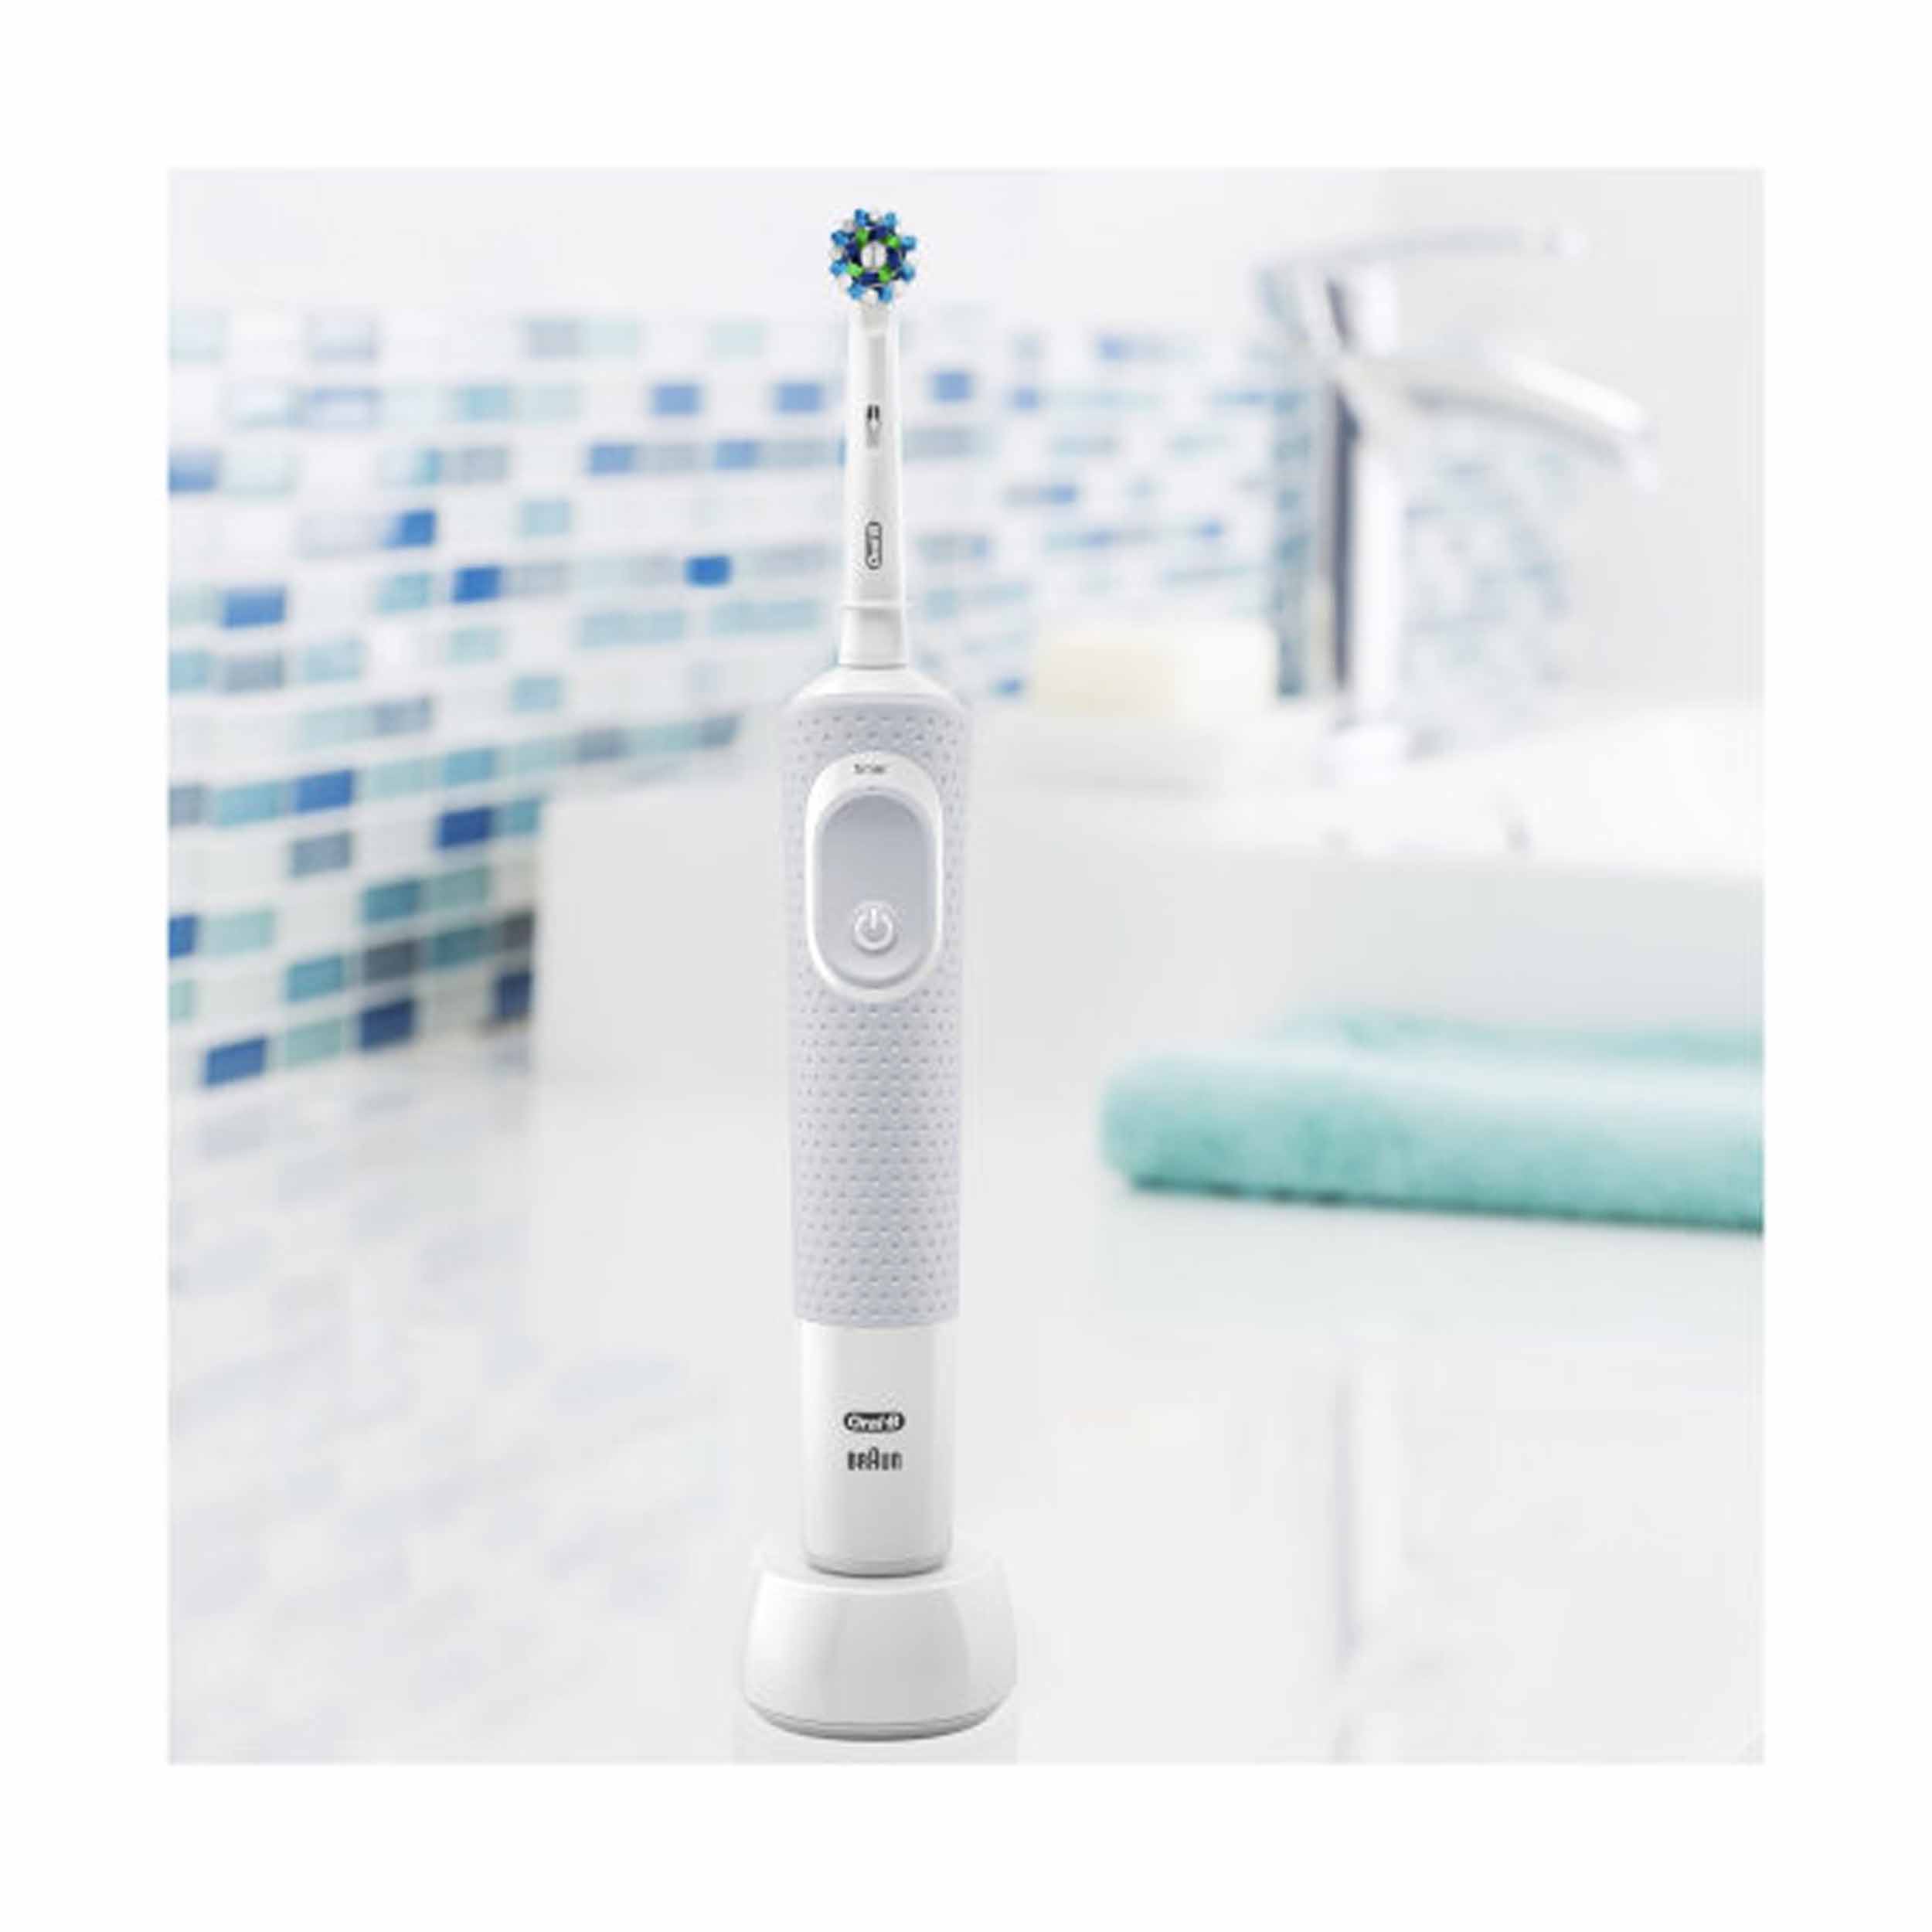 ORAL-B Electric Rechargeable Tooth Brush